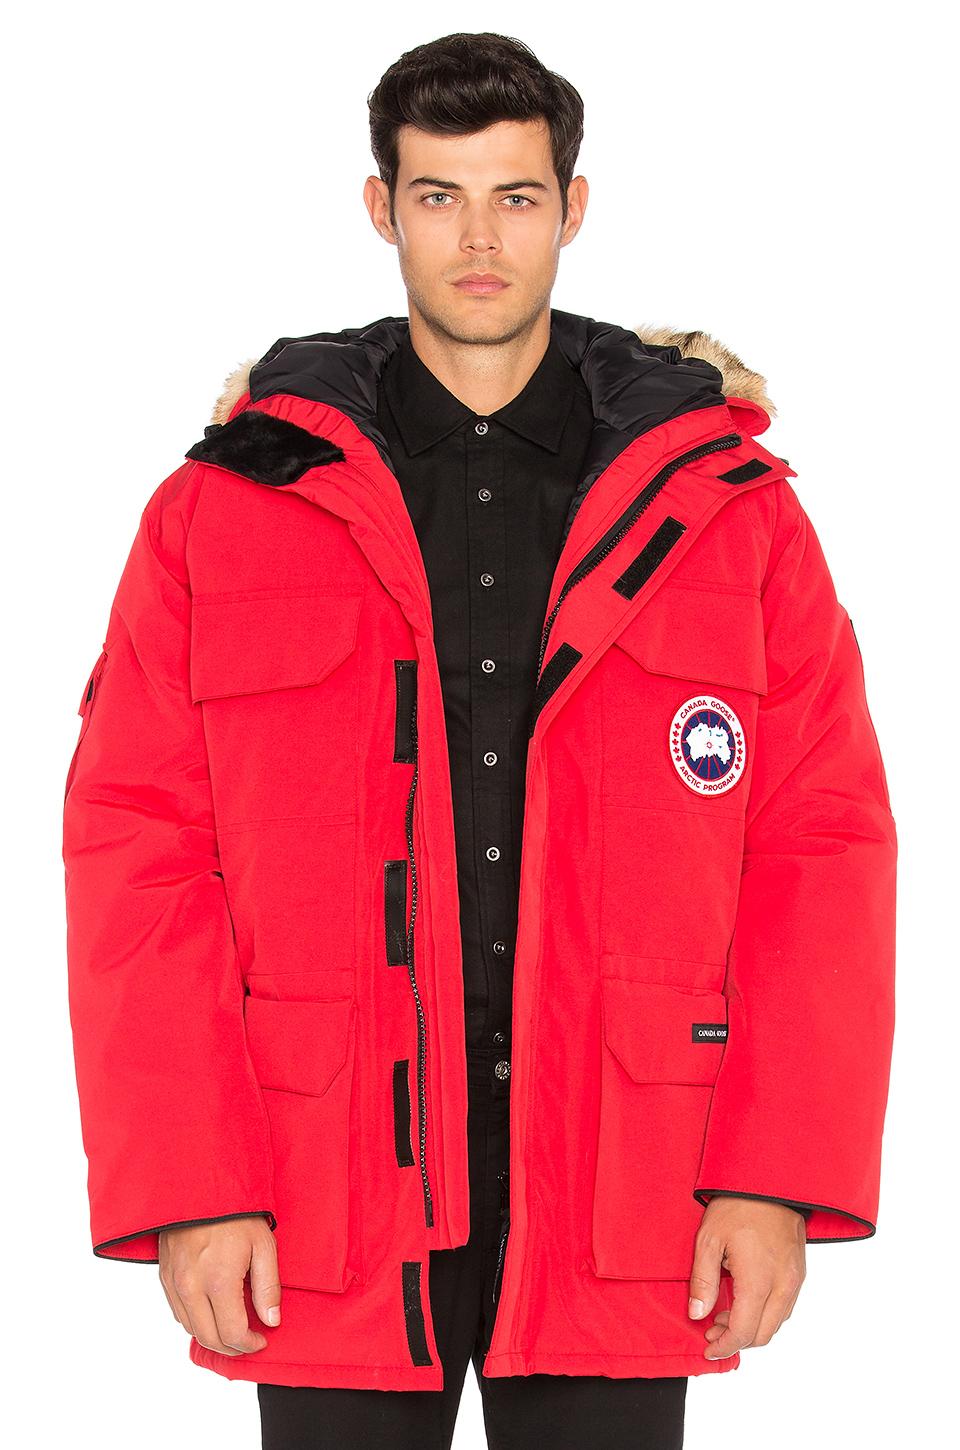 Lyst - Canada Goose Expedition Coyote Fur Trim Parka in Red for Men